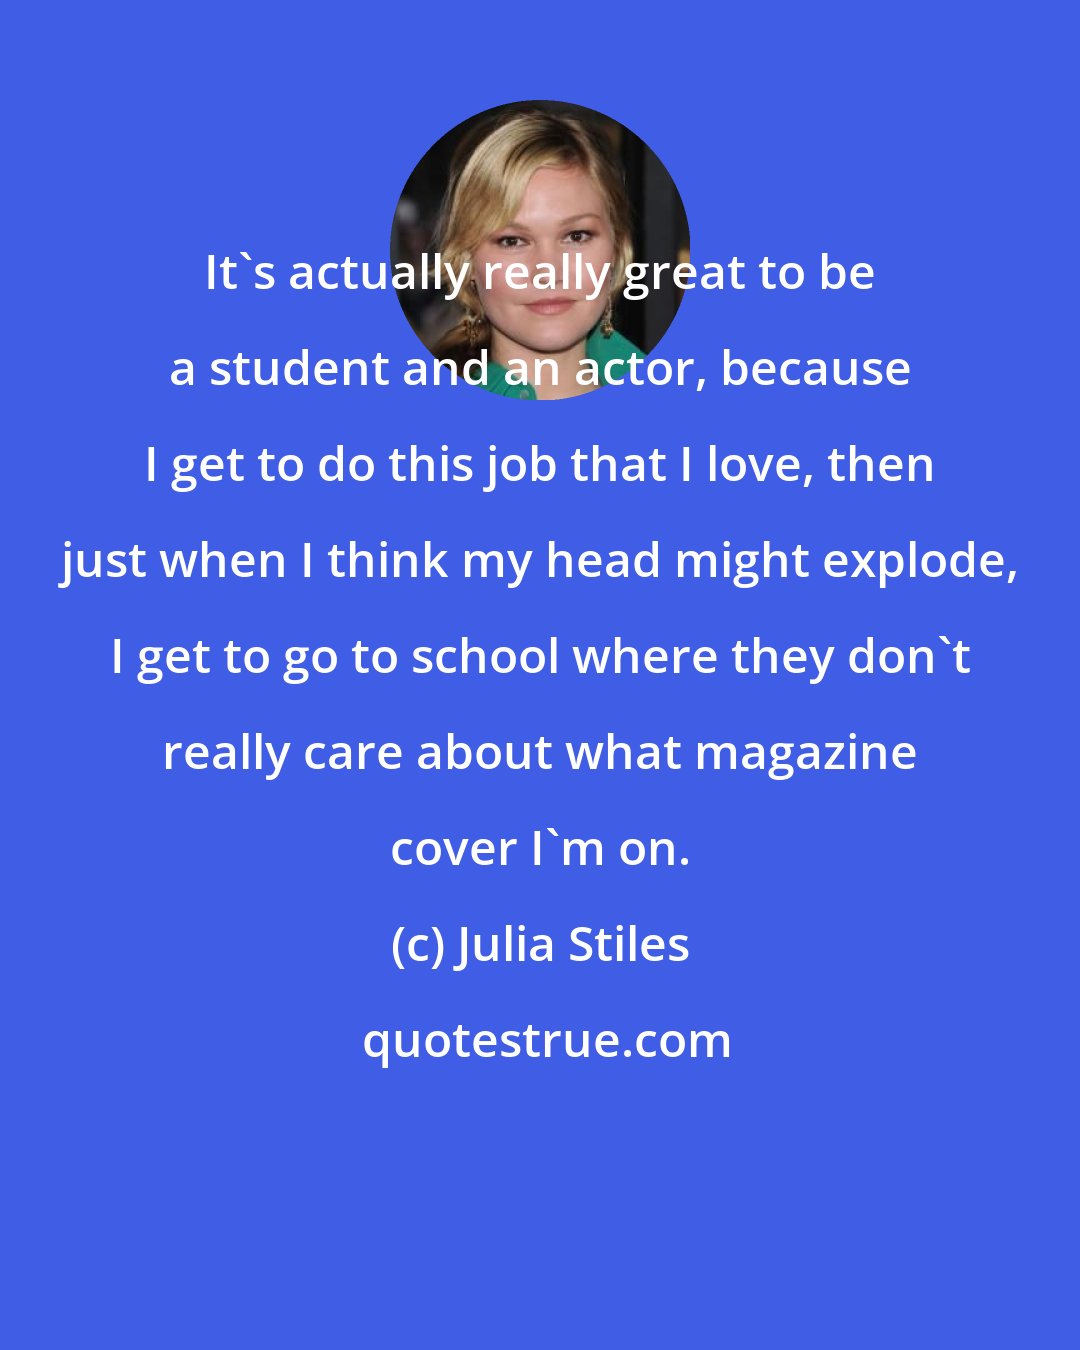 Julia Stiles: It's actually really great to be a student and an actor, because I get to do this job that I love, then just when I think my head might explode, I get to go to school where they don't really care about what magazine cover I'm on.